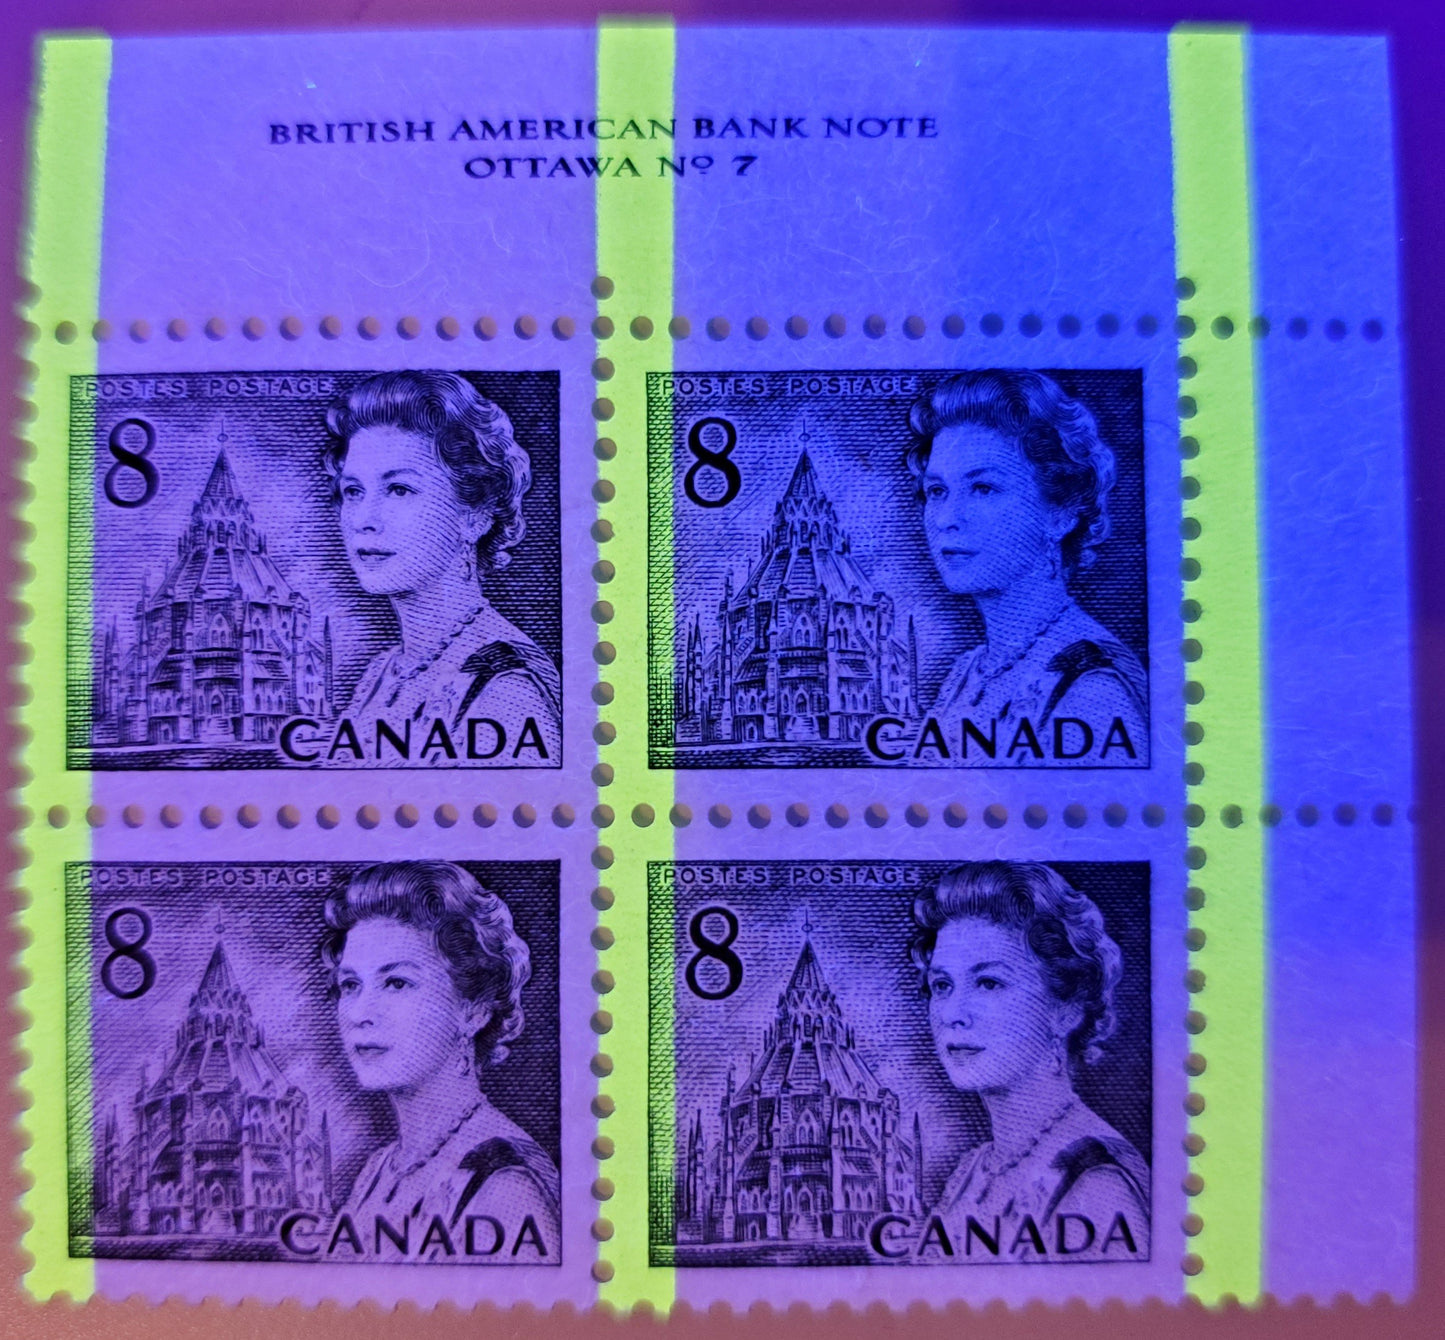 Lot 186 Canada #544piv 8c Slate Queen Elizabeth II, 1967-1973 Centennial Issue, An Unlisted VFNH UR T4 GT2 Tagged Plate 7 Block Of 4 On HF-fl Smooth Paper With PVA Gum, G2aL Tagging Error